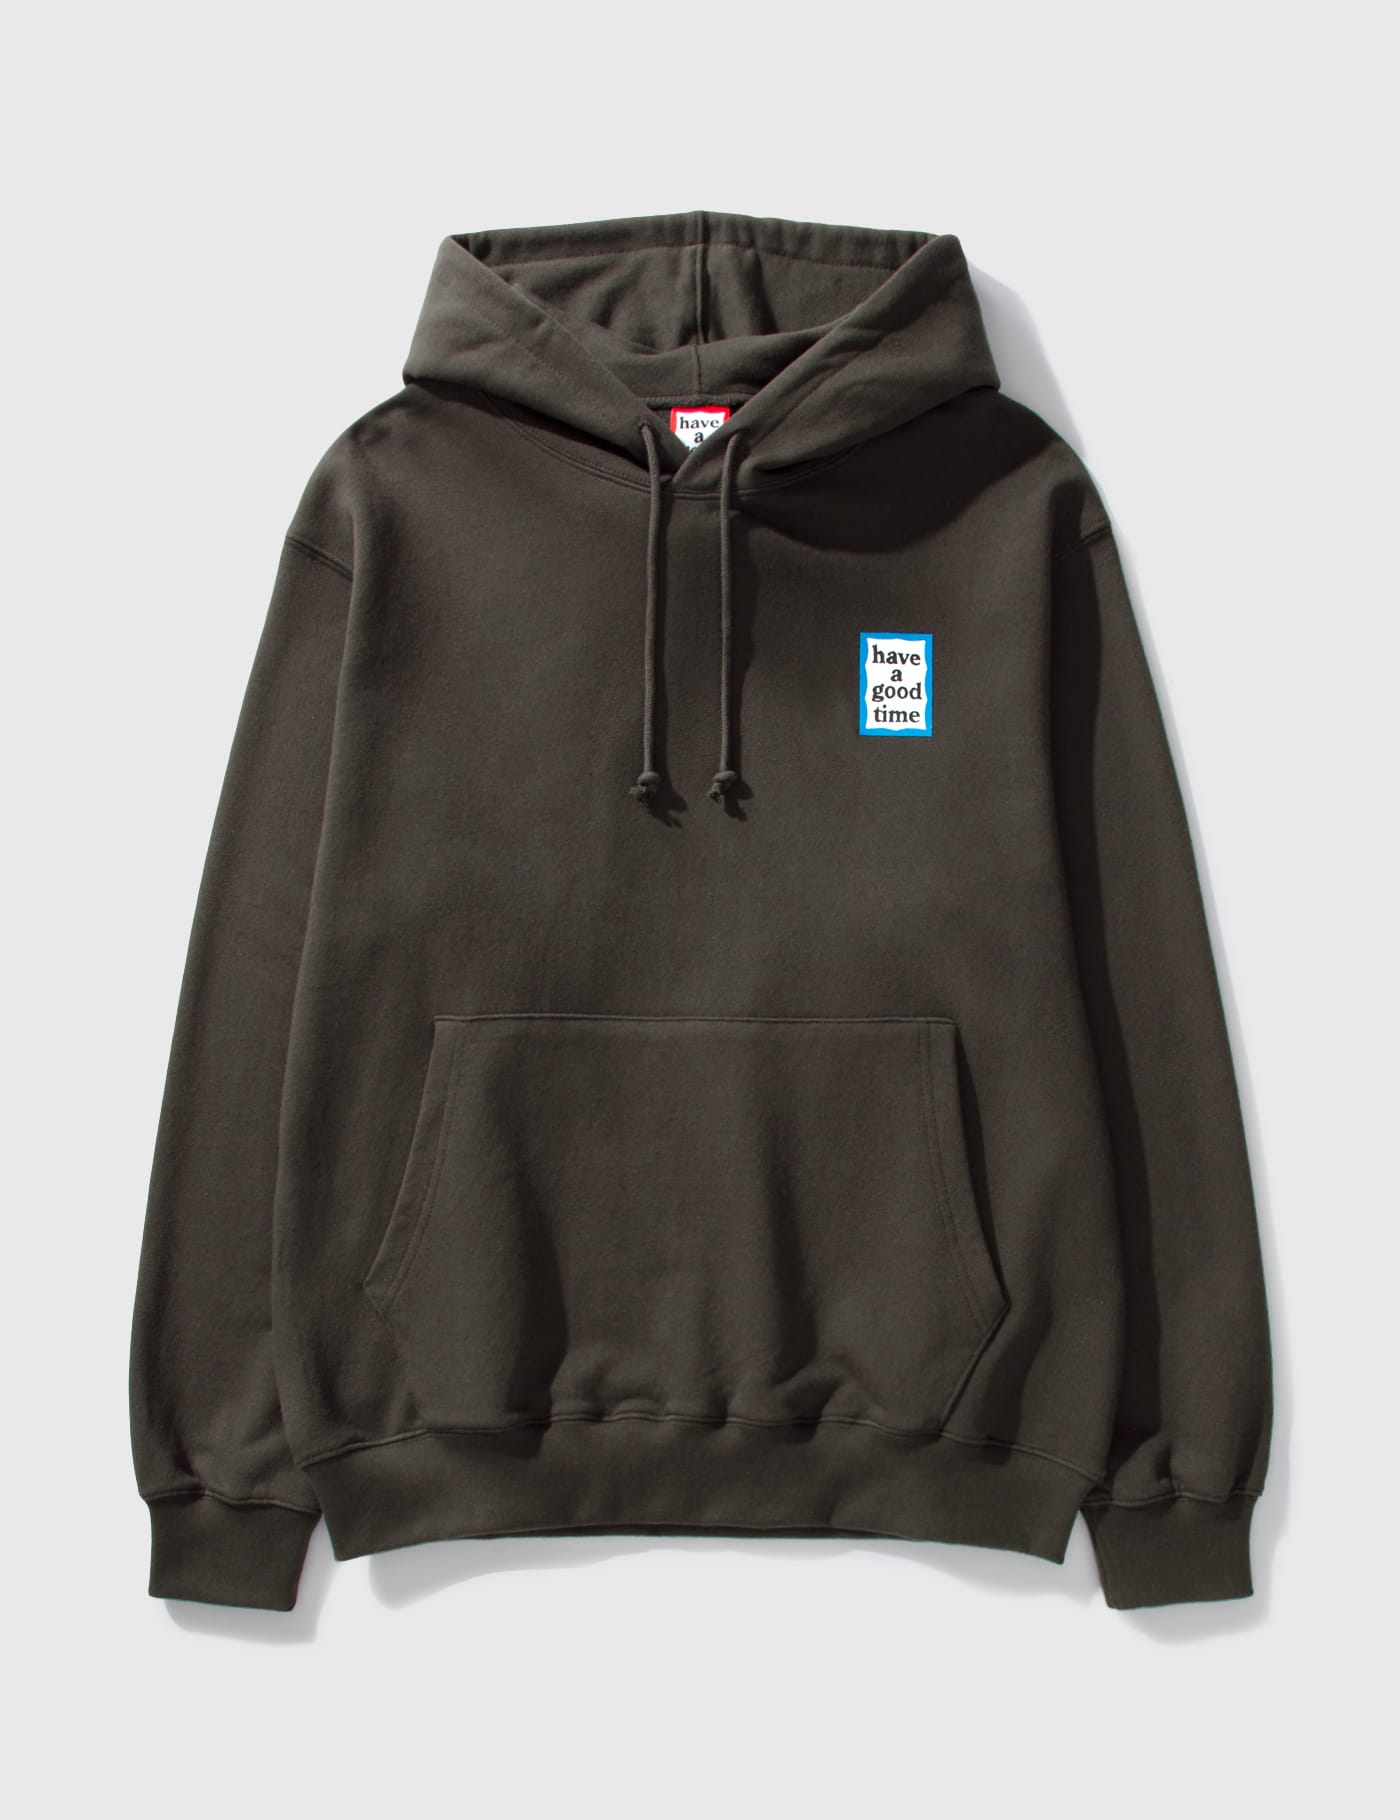 Have A Good Time - Mini Frame Pull Over Hoodie | HBX - Globally